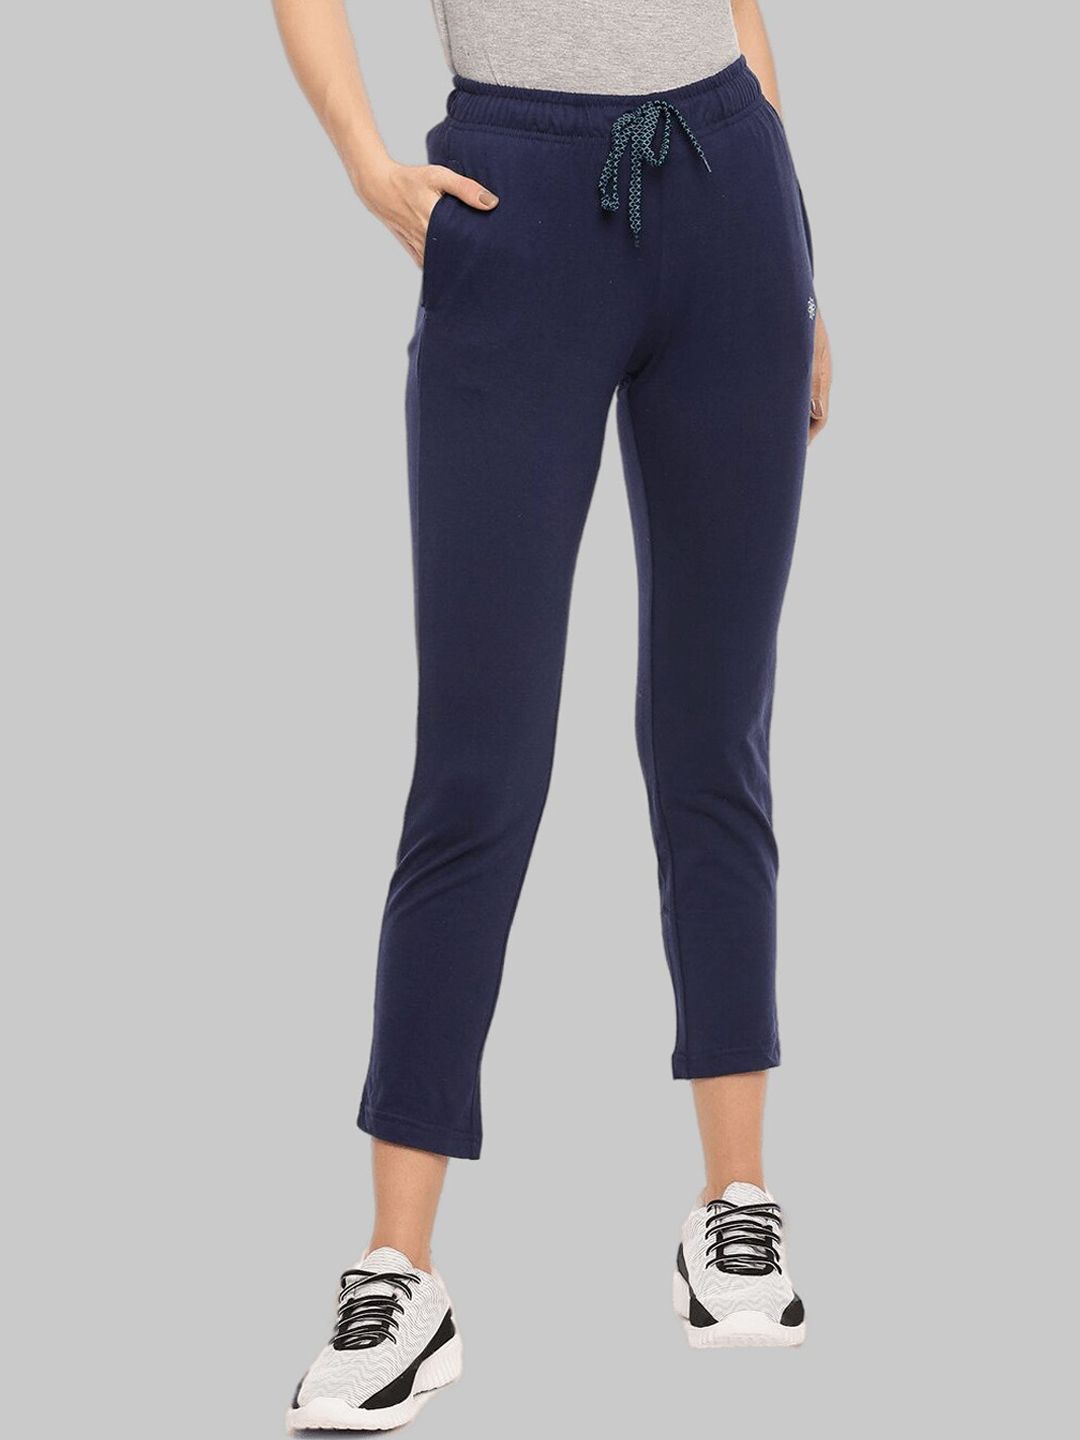 Dollar Missy Women Navy-Blue Solid Cotton Dry fit Track Pant Price in India